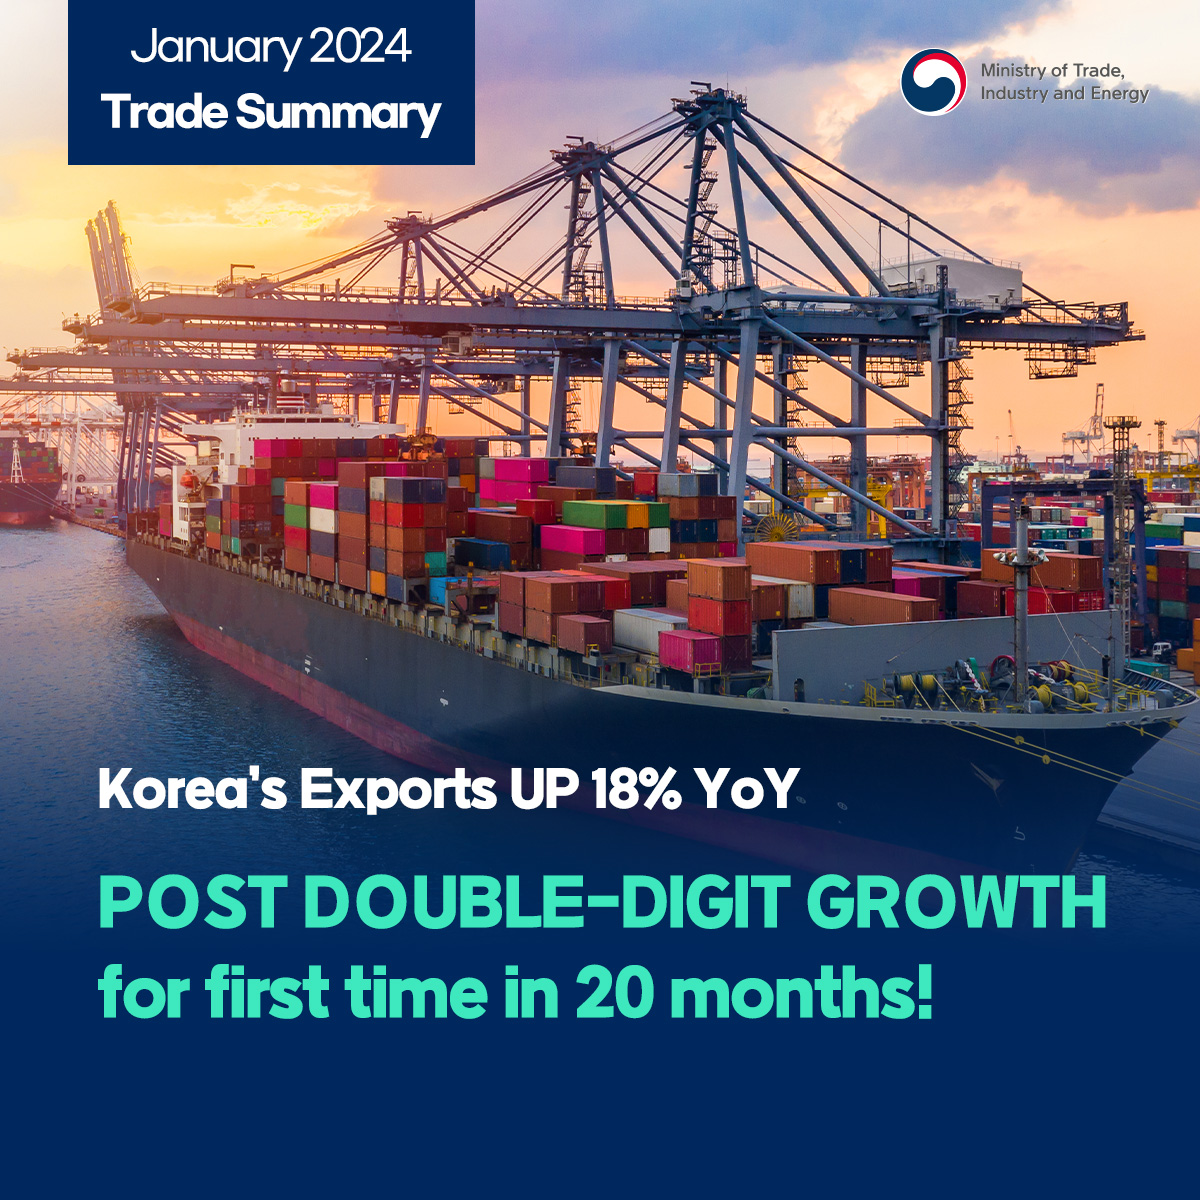 January 2024 Trade Summary
Ministry of Trade, Industry and Energy
Korea's Exports UP 18% YoY
POST DOUBLE-DIGIT GROWTH for first time in 20 months!